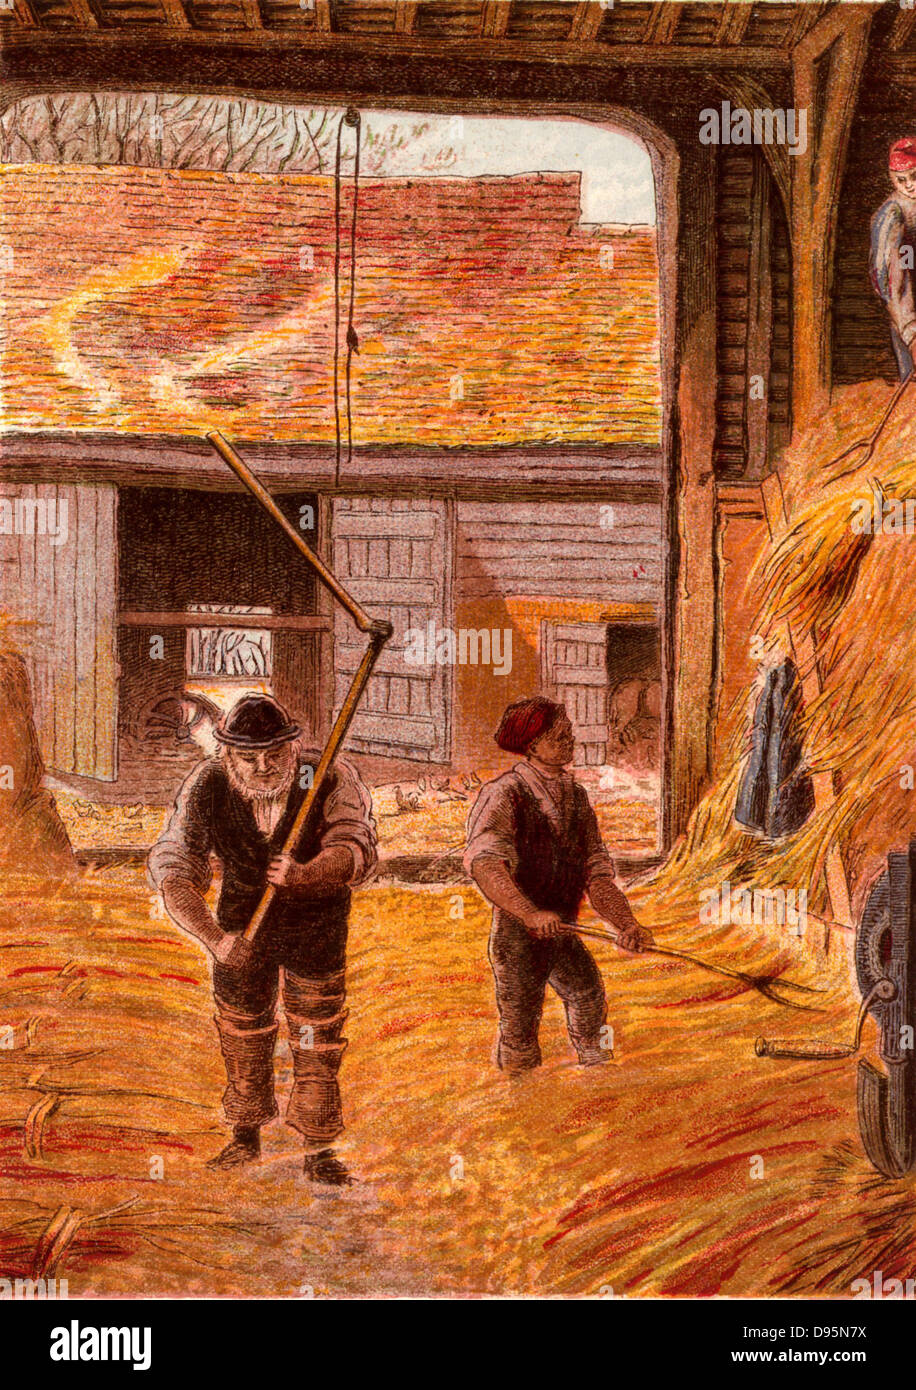 Farm labourers threshing corn with flails on the barn floor. The sheaves of corn had been brought in at Autumn harvest time and stacked in the barn. Kronheim chromolithograph from 'Pictures from Nature' by Mary Howitt (London, 1869). Stock Photo